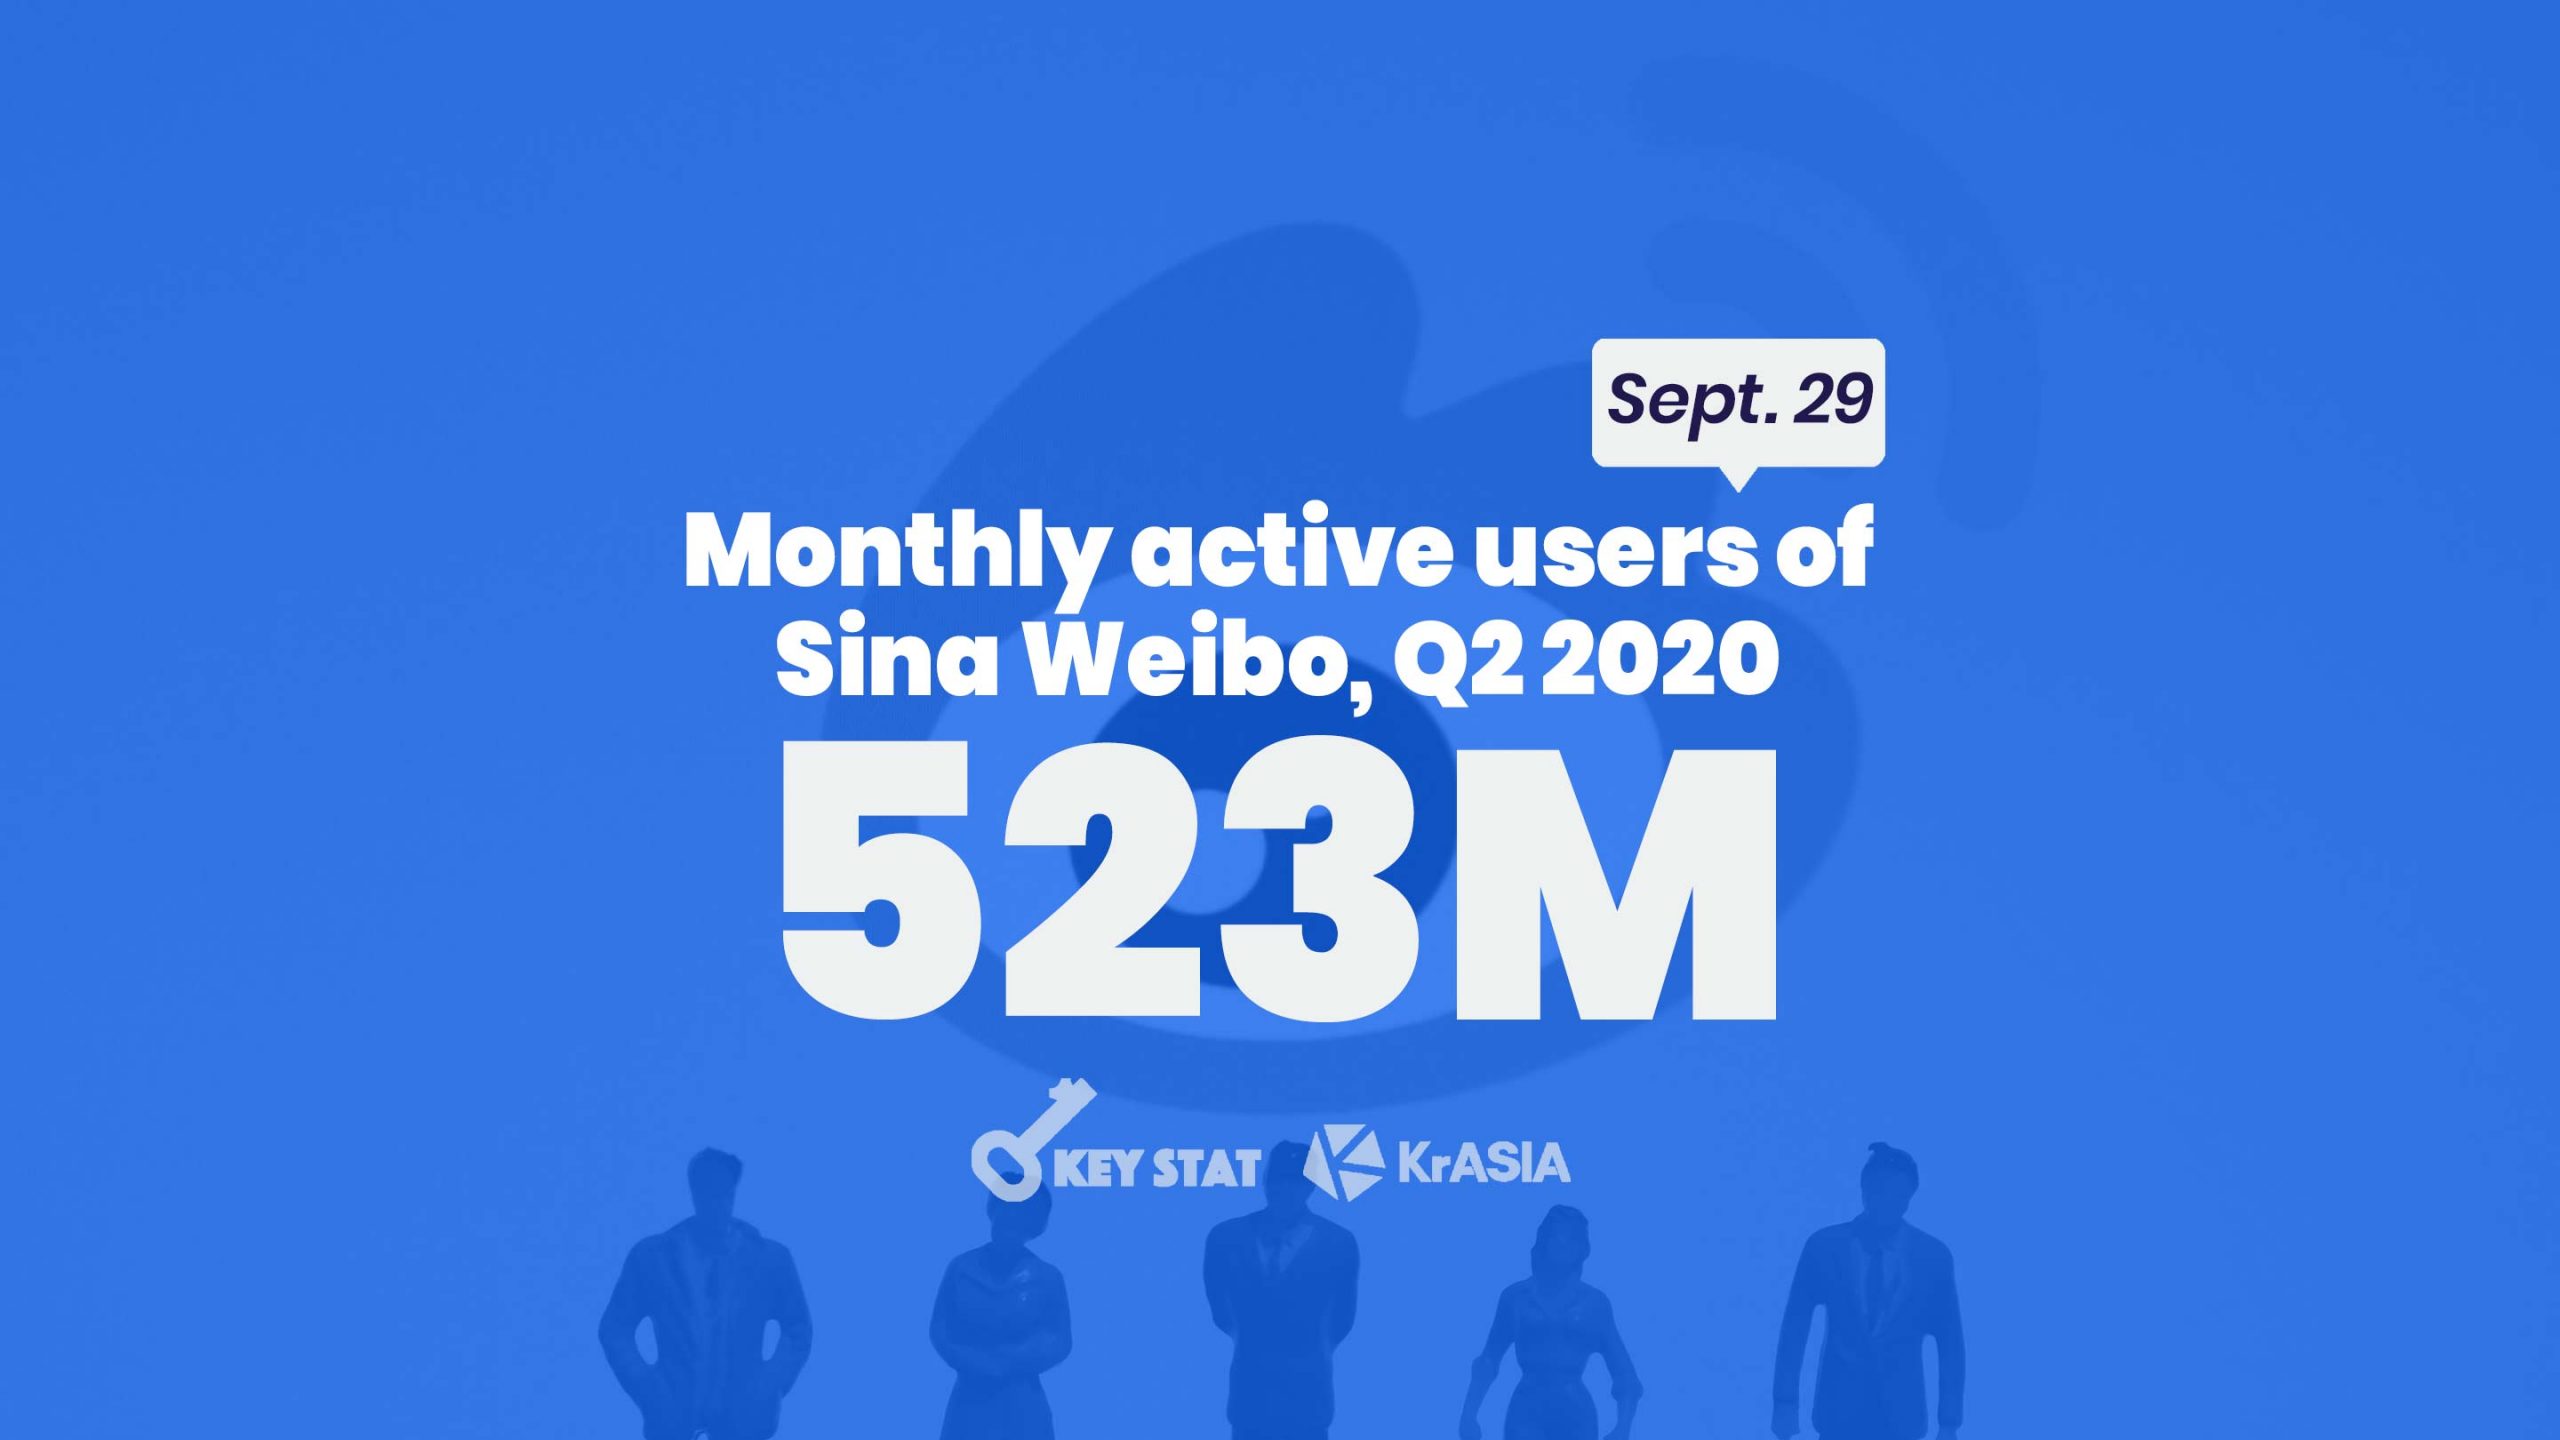 KEY STAT | Sina Weibo sees users growth and revenue dip in second quarter 2020 results